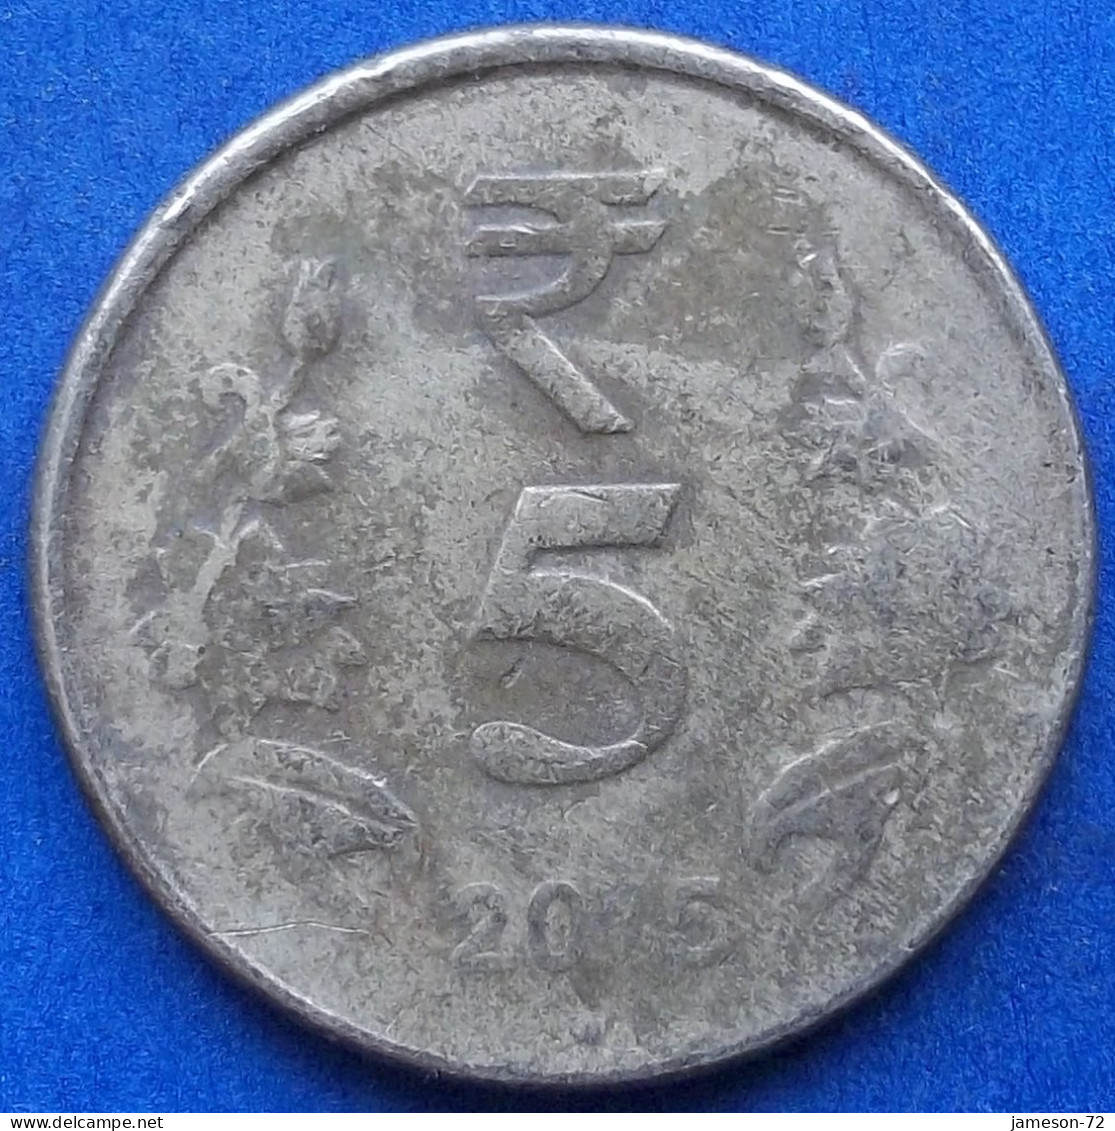 INDIA - 5 Rupees 2015 "Lotus Flowers" KM# 399.1 Republic Decimal Coinage (1957) - Edelweiss Coins - Georgië